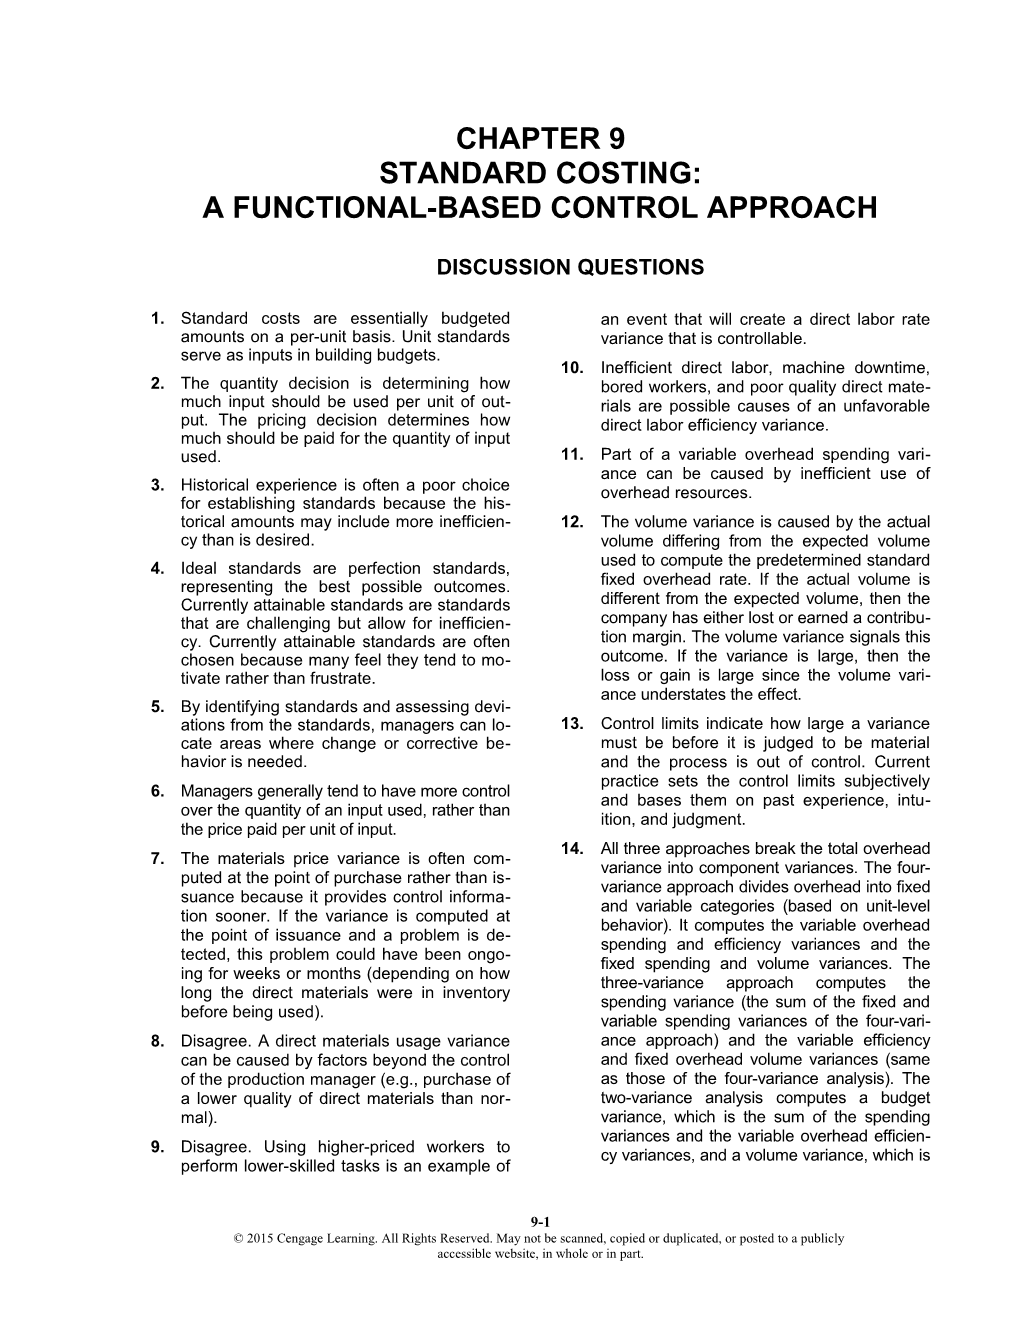 Standard Costing: a Functional-Based Control Approach